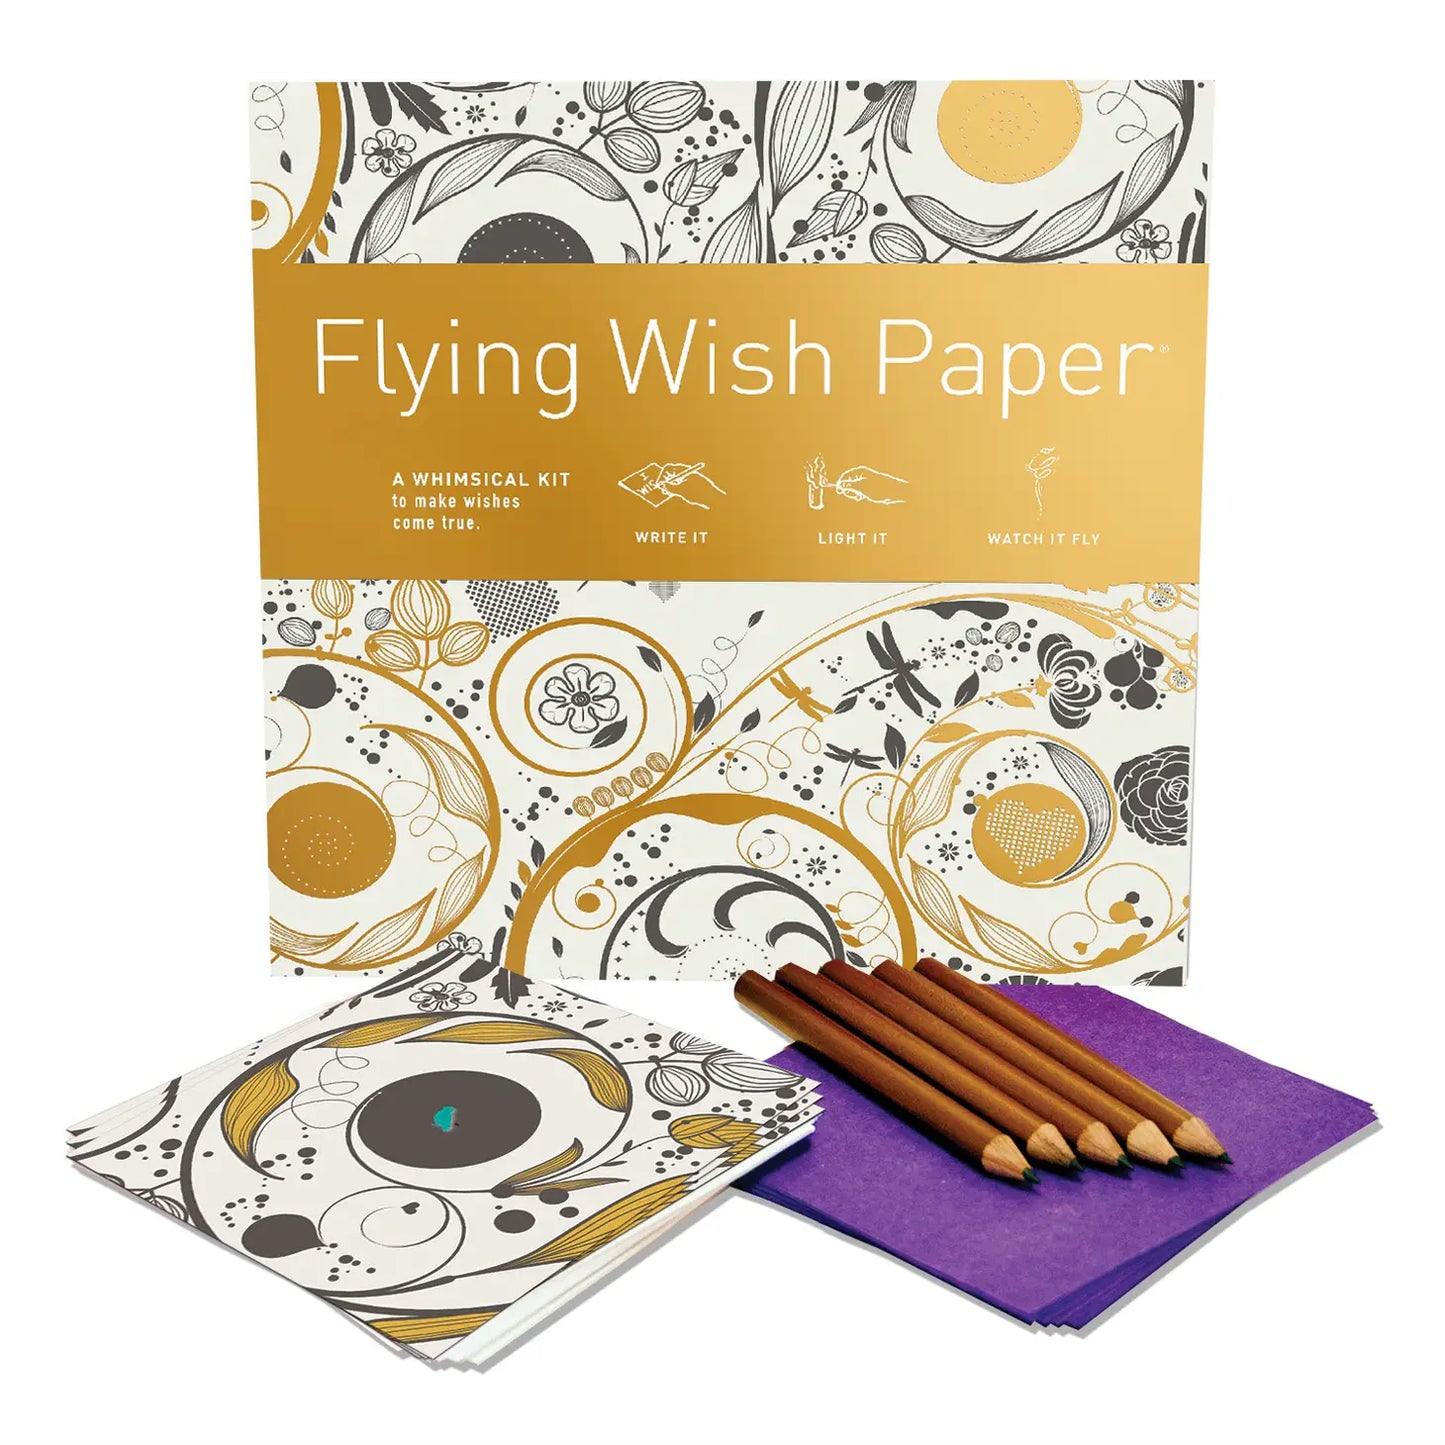 FLYING WISH PAPER 'Swirls' / Large Kit with 50 Wishes + accessories